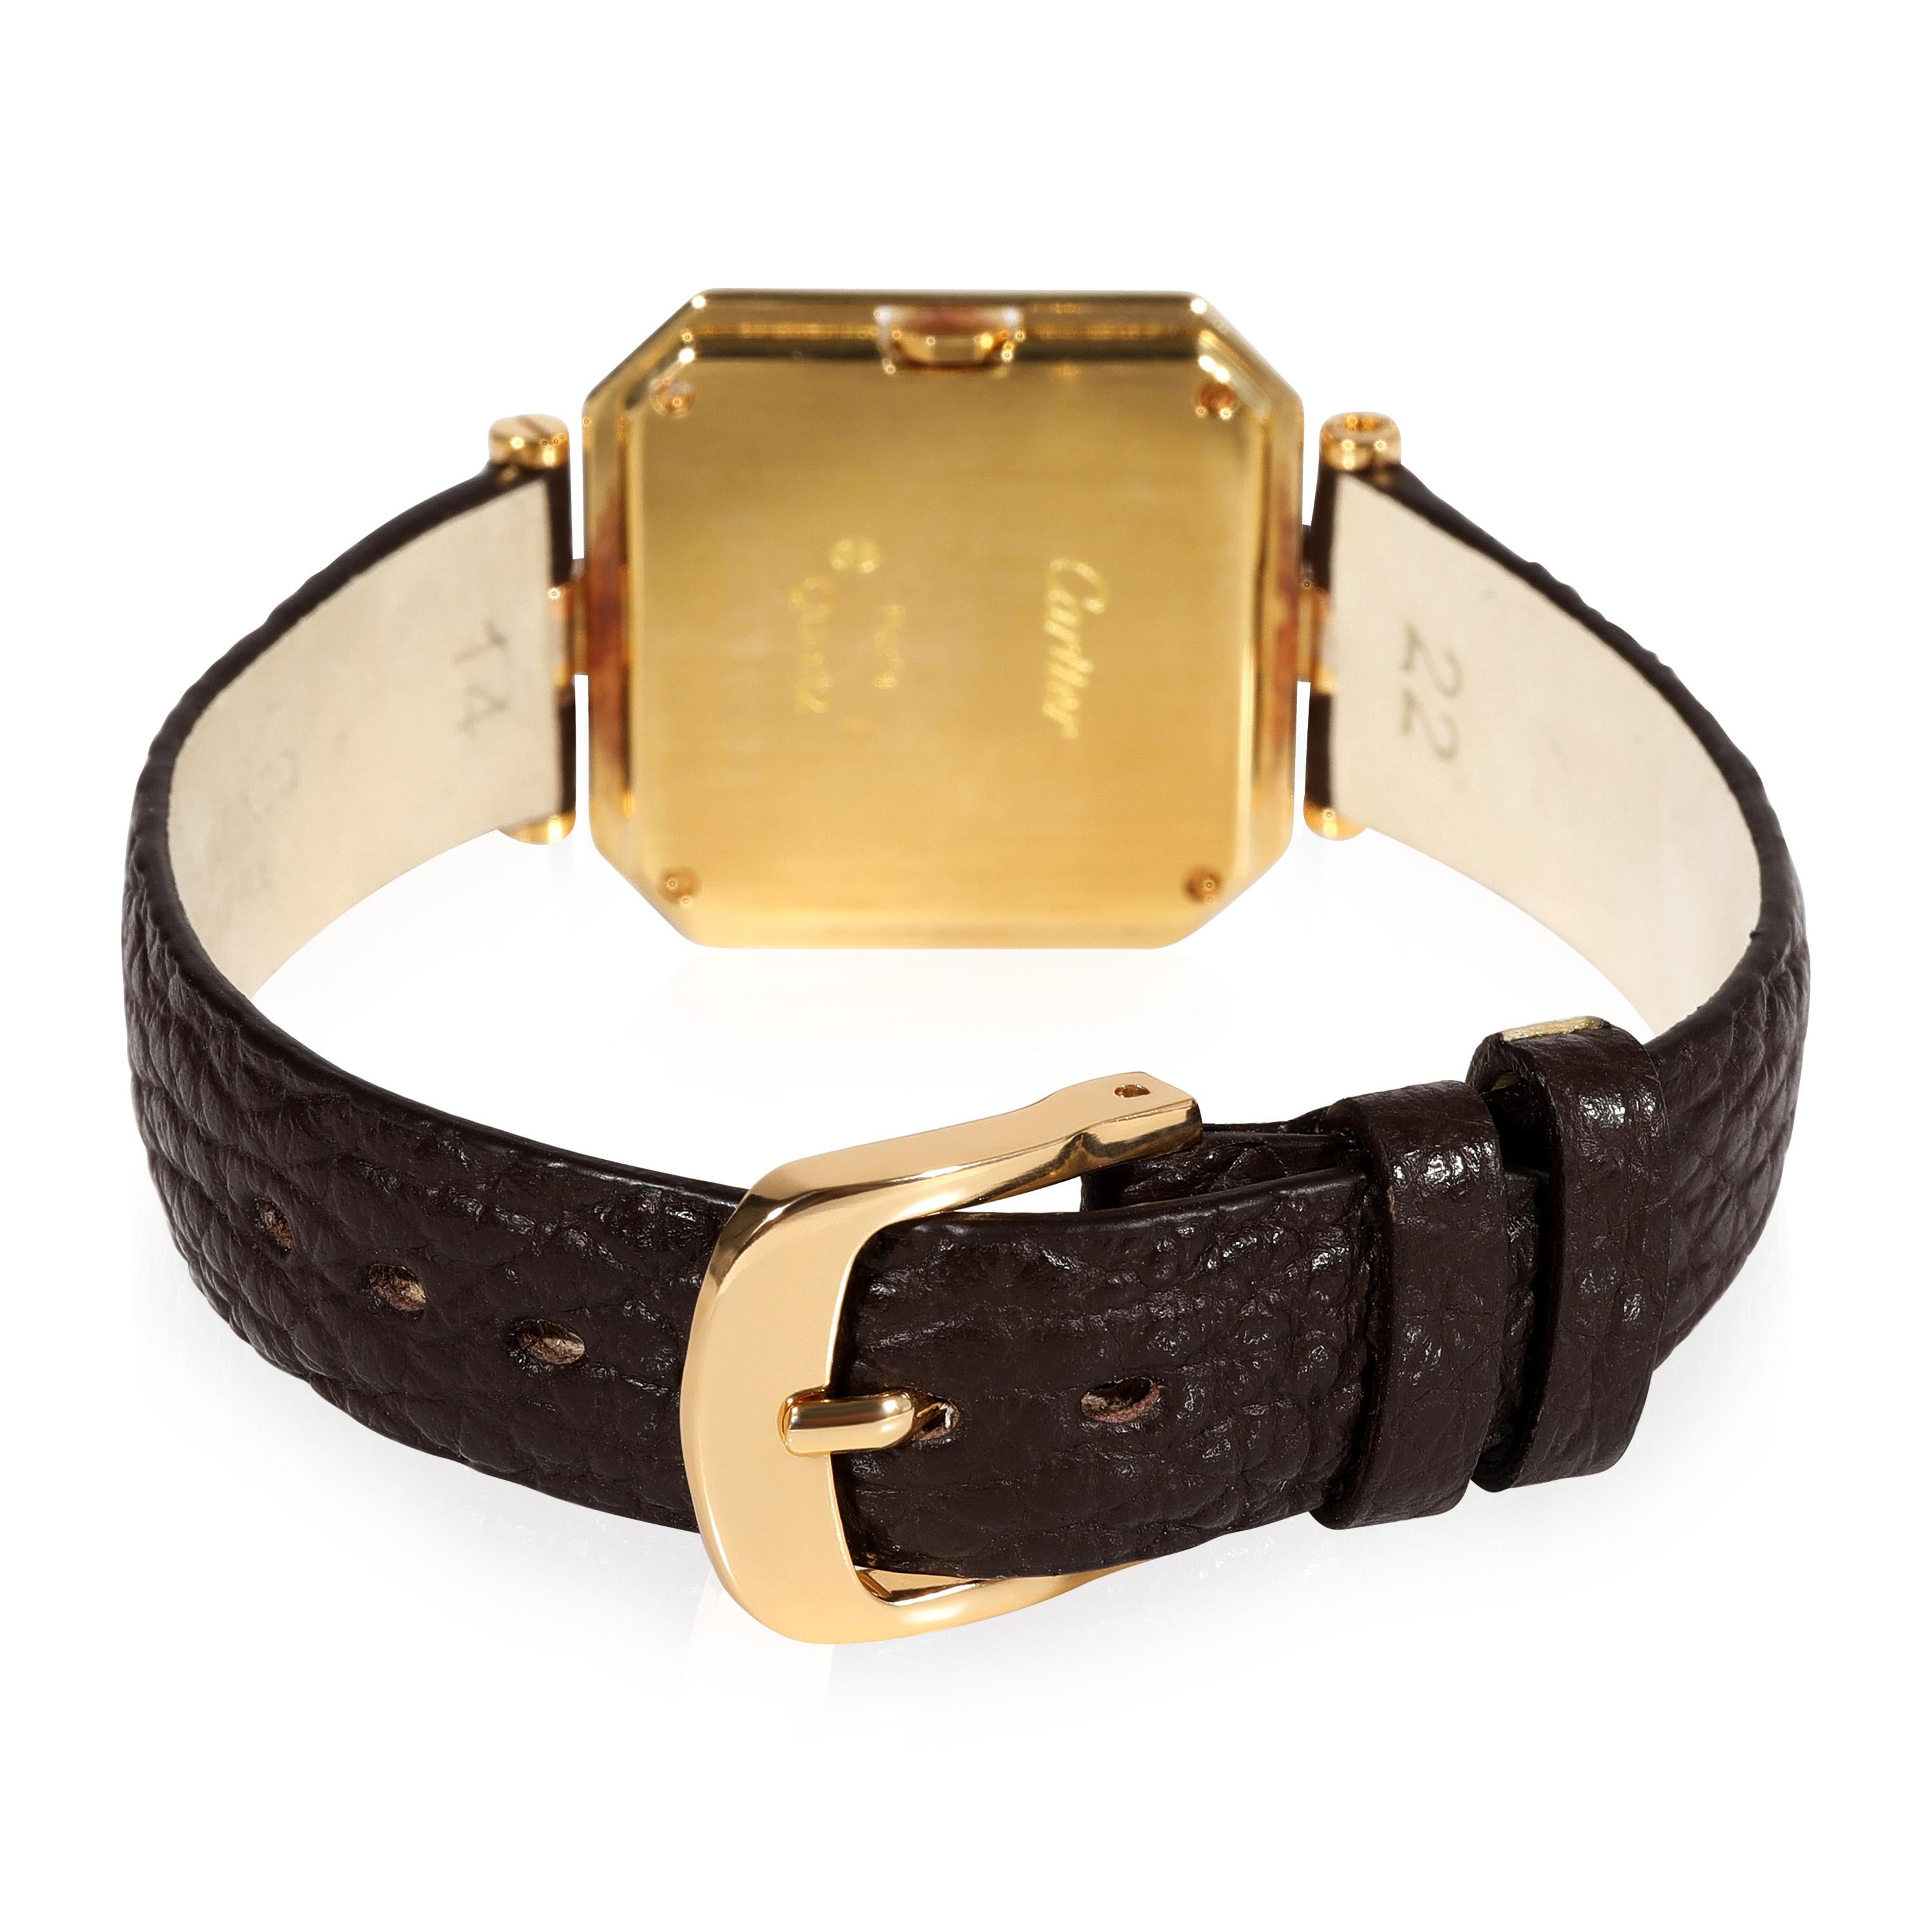 Cartier Ceinture Ceinture Women's Watch in  Yellow Gold

SKU: 119476

PRIMARY DETAILS
Brand: Cartier
Model: Ceinture
Country of Origin: Switzerland
Movement Type: Quartz: Battery
Year of Manufacture: 1990-1999
Condition: In excellent condition and